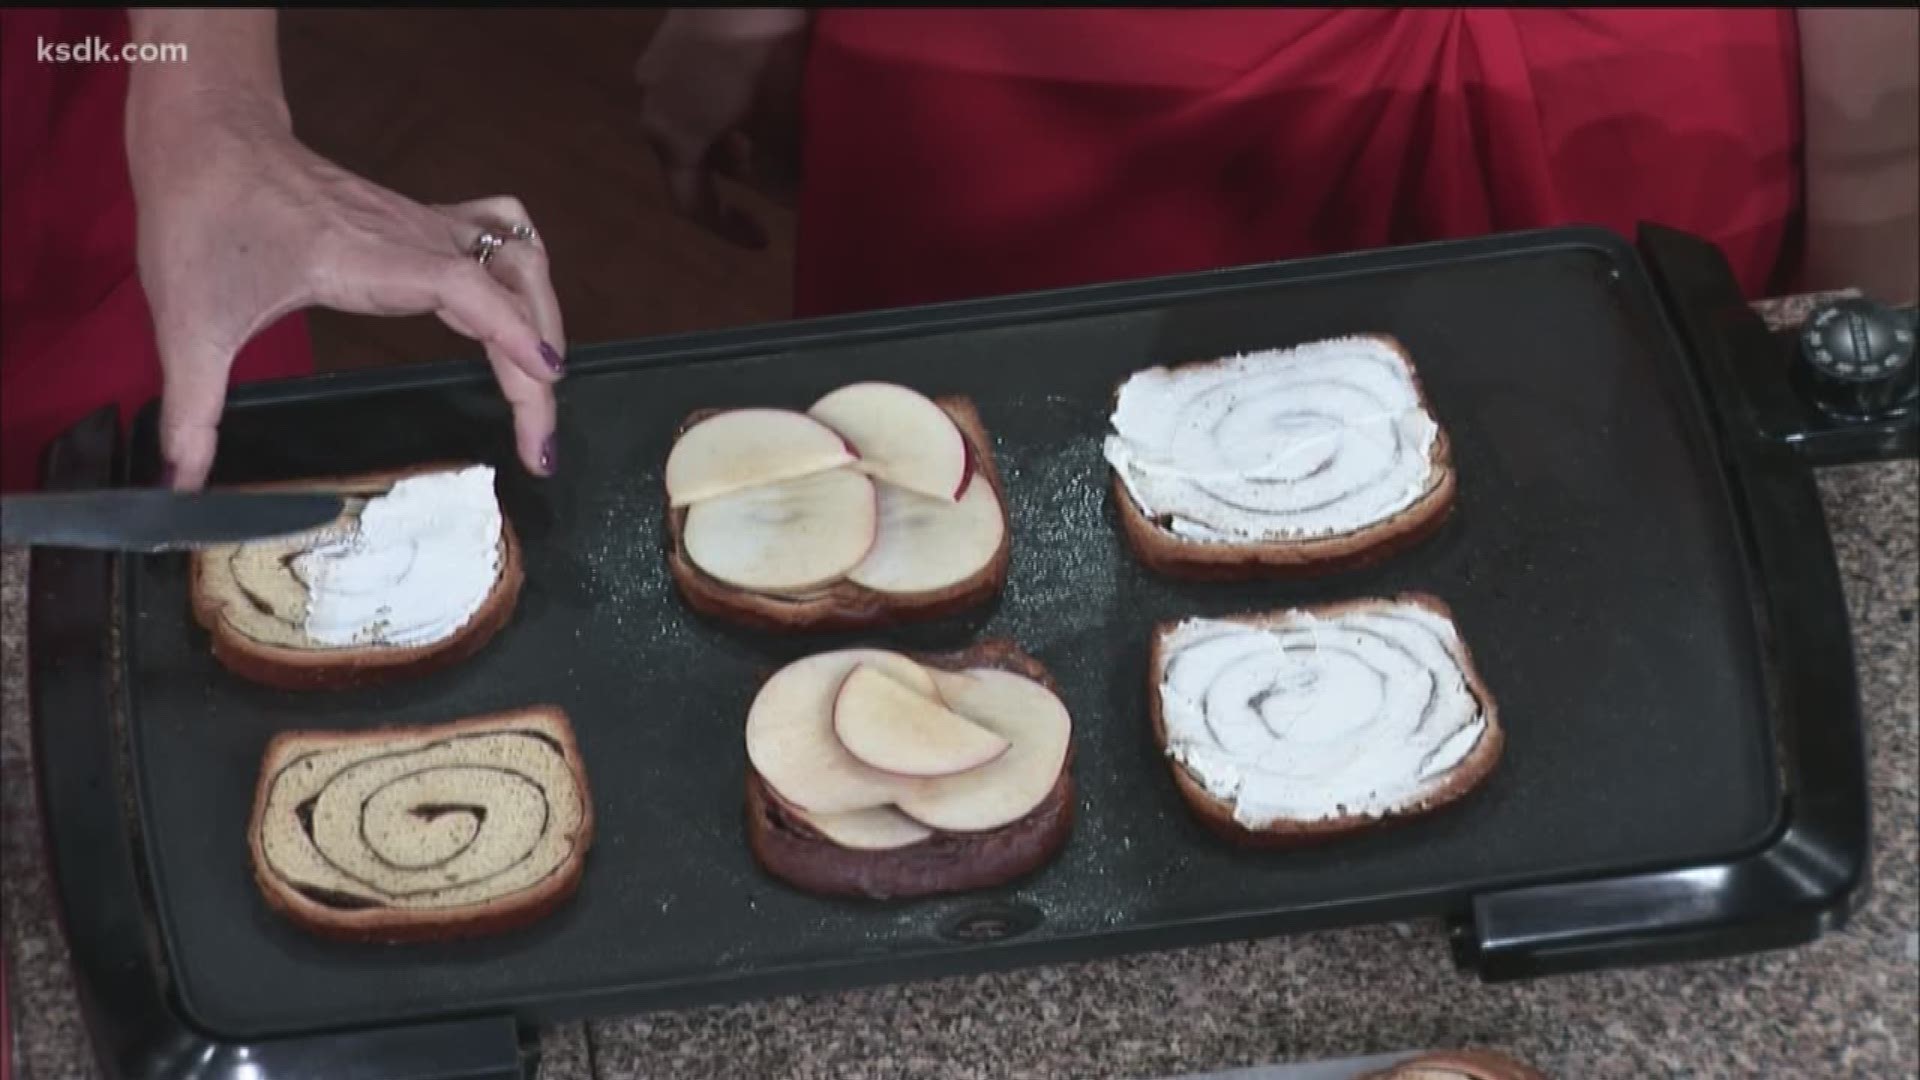 Angie Eckert of Eckert’s Farm is here to share a dessert grilled cheese recipe.